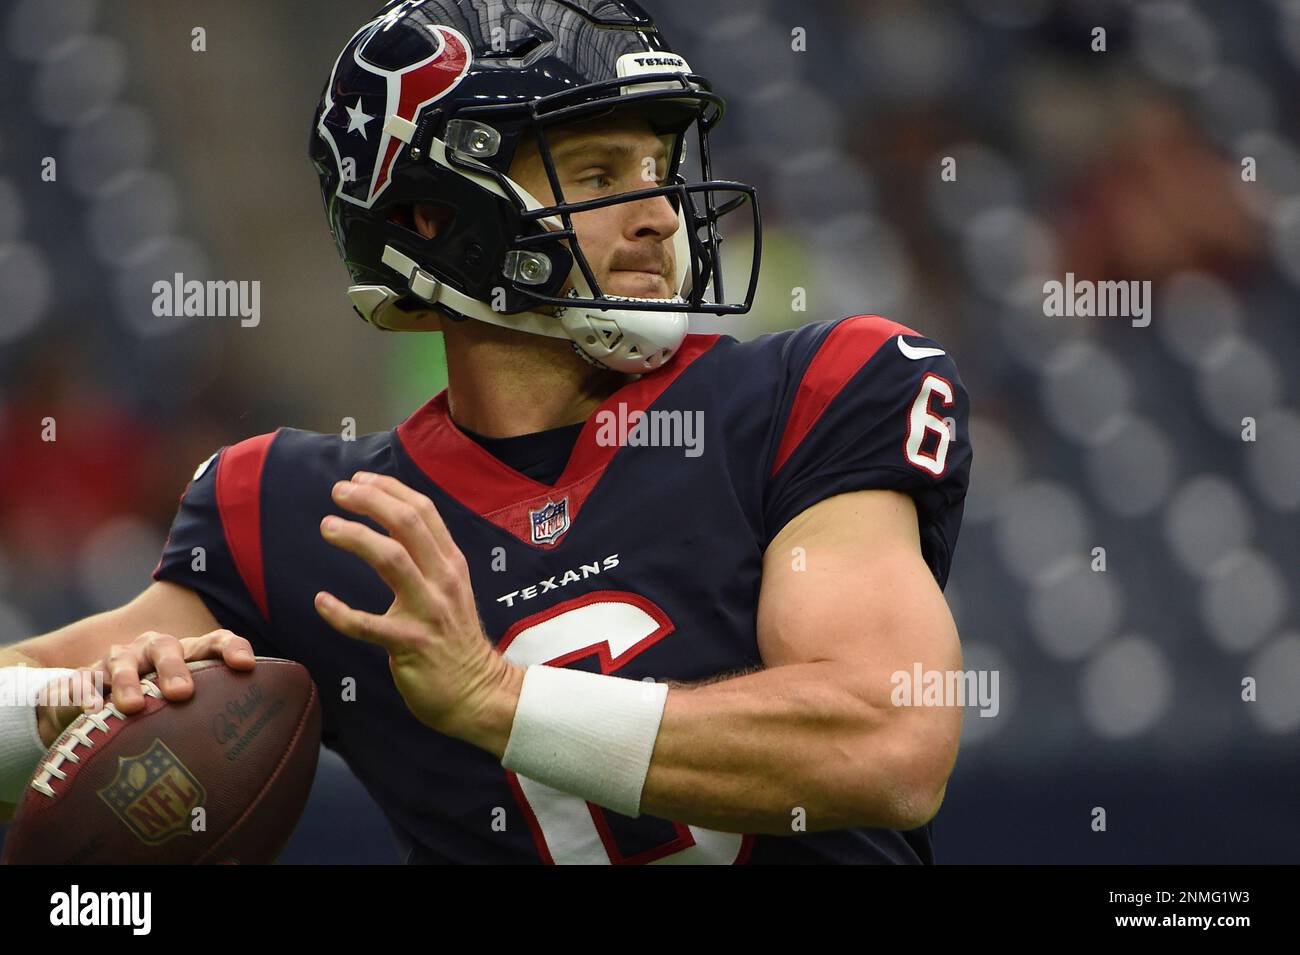 HOUSTON, TX - OCTOBER 10: Houston Texans quarterback Jeff Driskel (6) warms  up before the football game between the New England Patriots and Houston  Texans at NRG Stadium on October 10, 2021